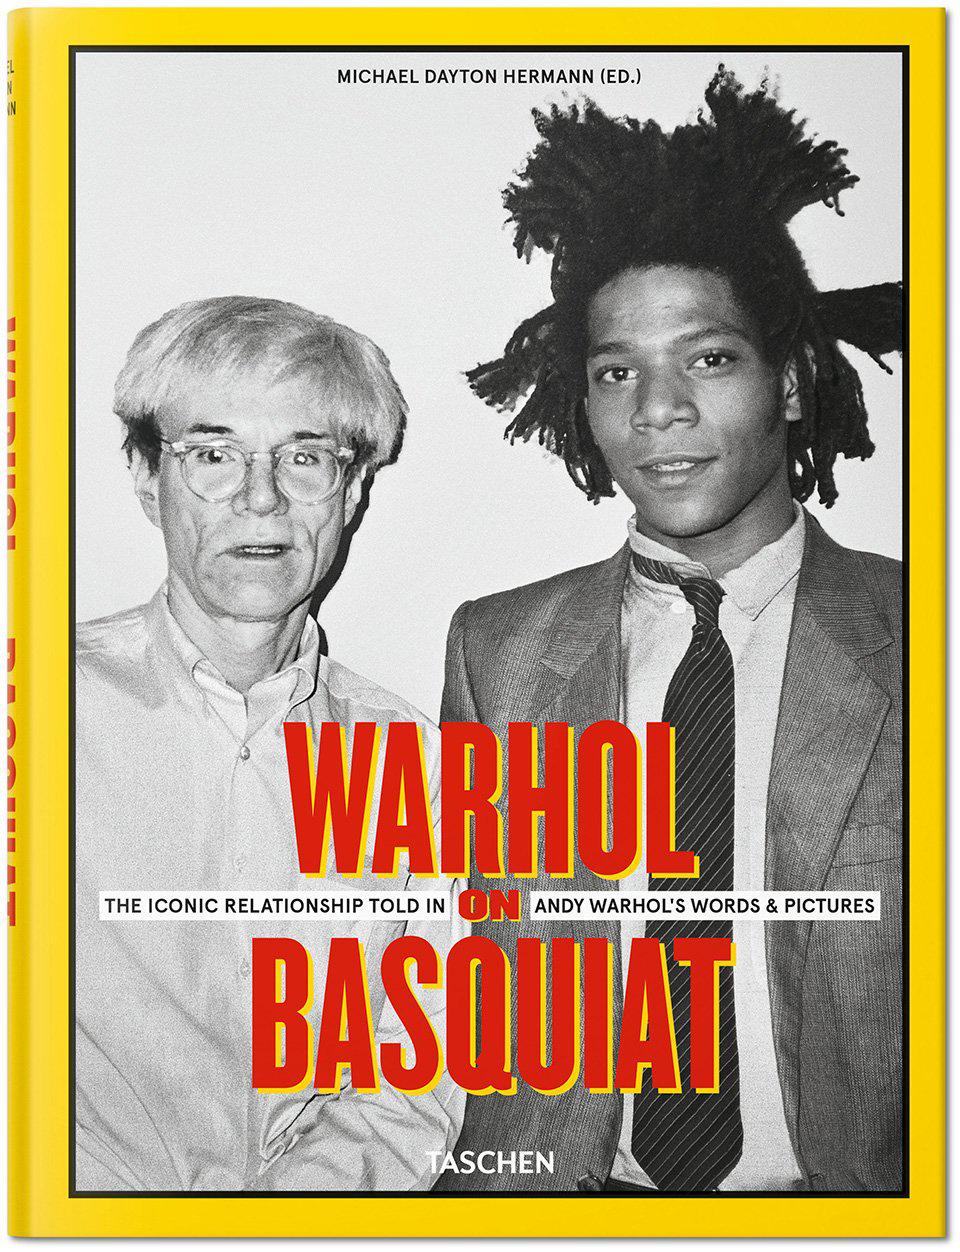 "Warhol on Basquiat. The Iconic Relationship Told in Andy Warhol’s Words and Pictures", Michael Dayton Hermann, The Andy Warhol Foundation for the Visual Arts, auf Englisch, Taschen, 312 Seiten, 50 Euro